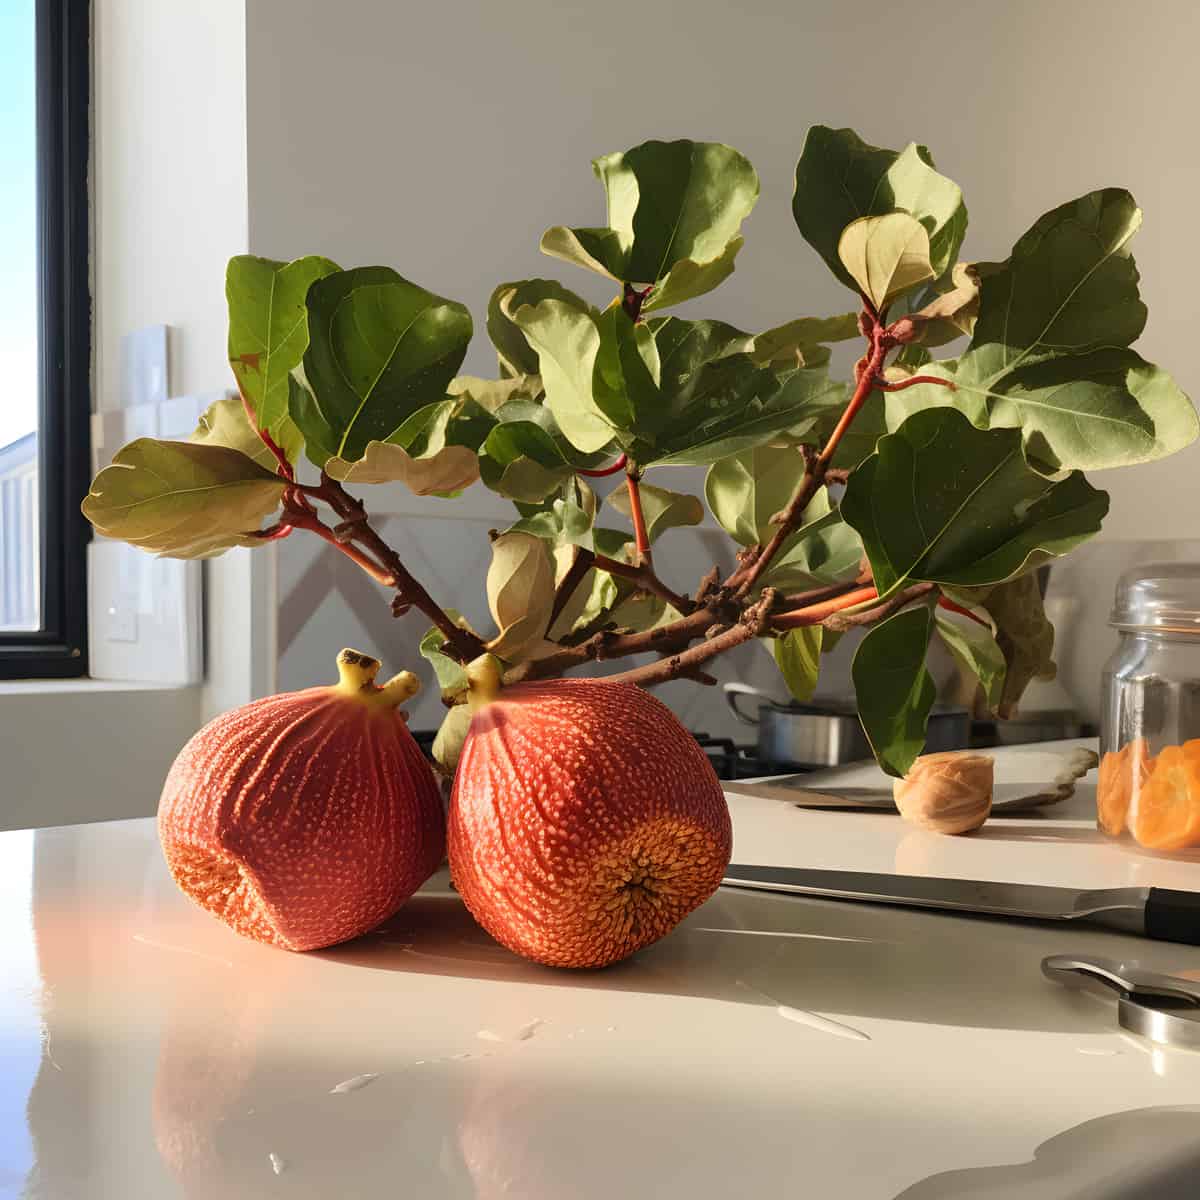 Sycamore Fig on a kitchen counter